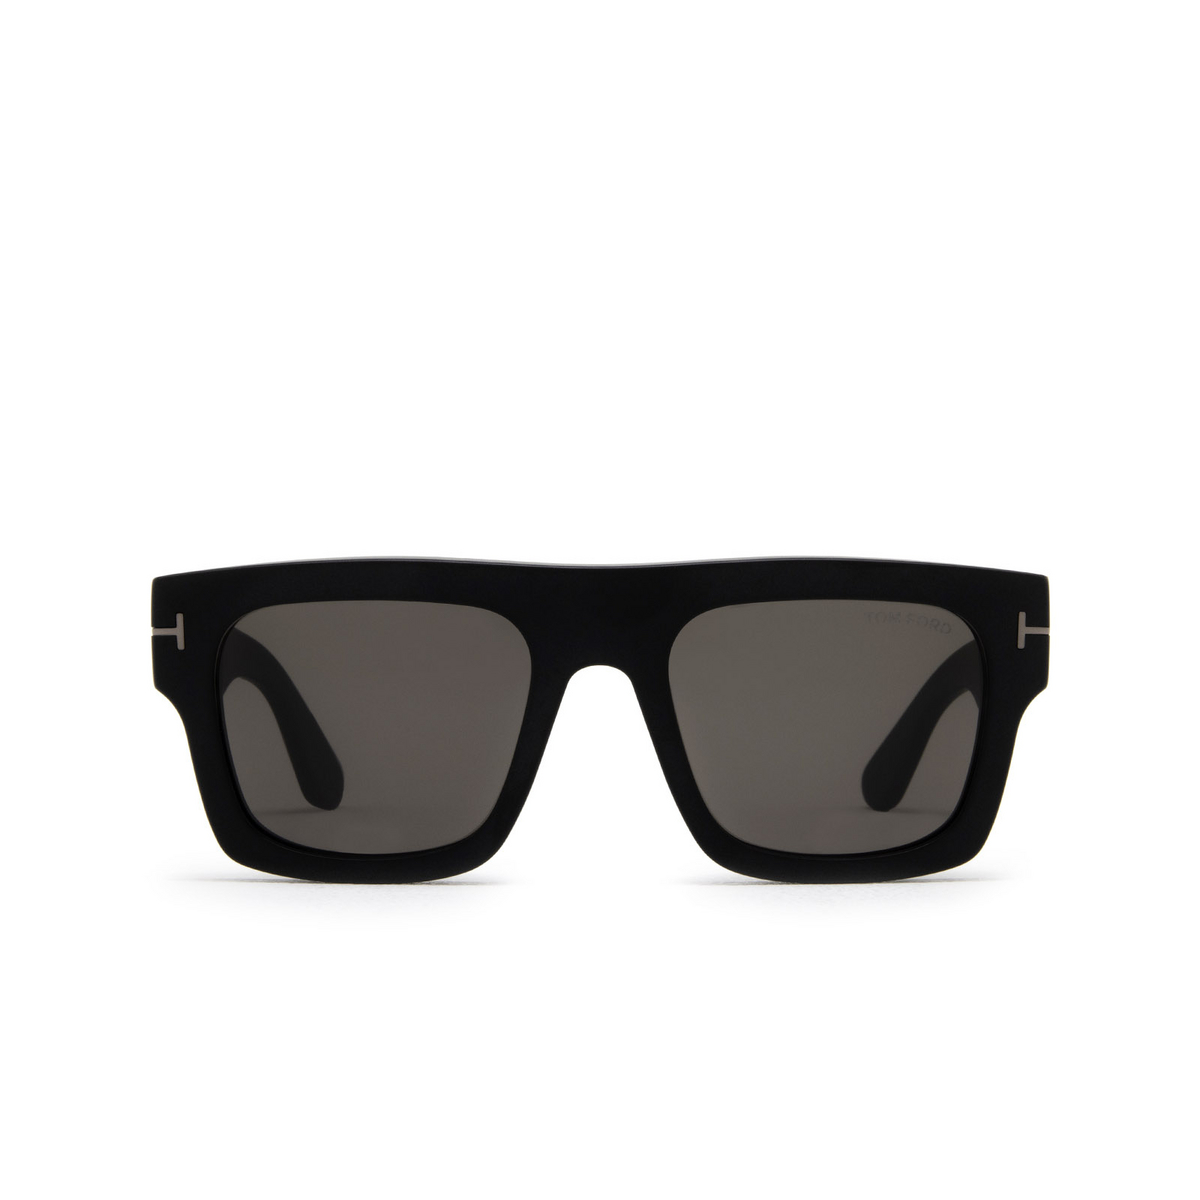 Tom Ford FAUSTO Sunglasses 02A Black - front view